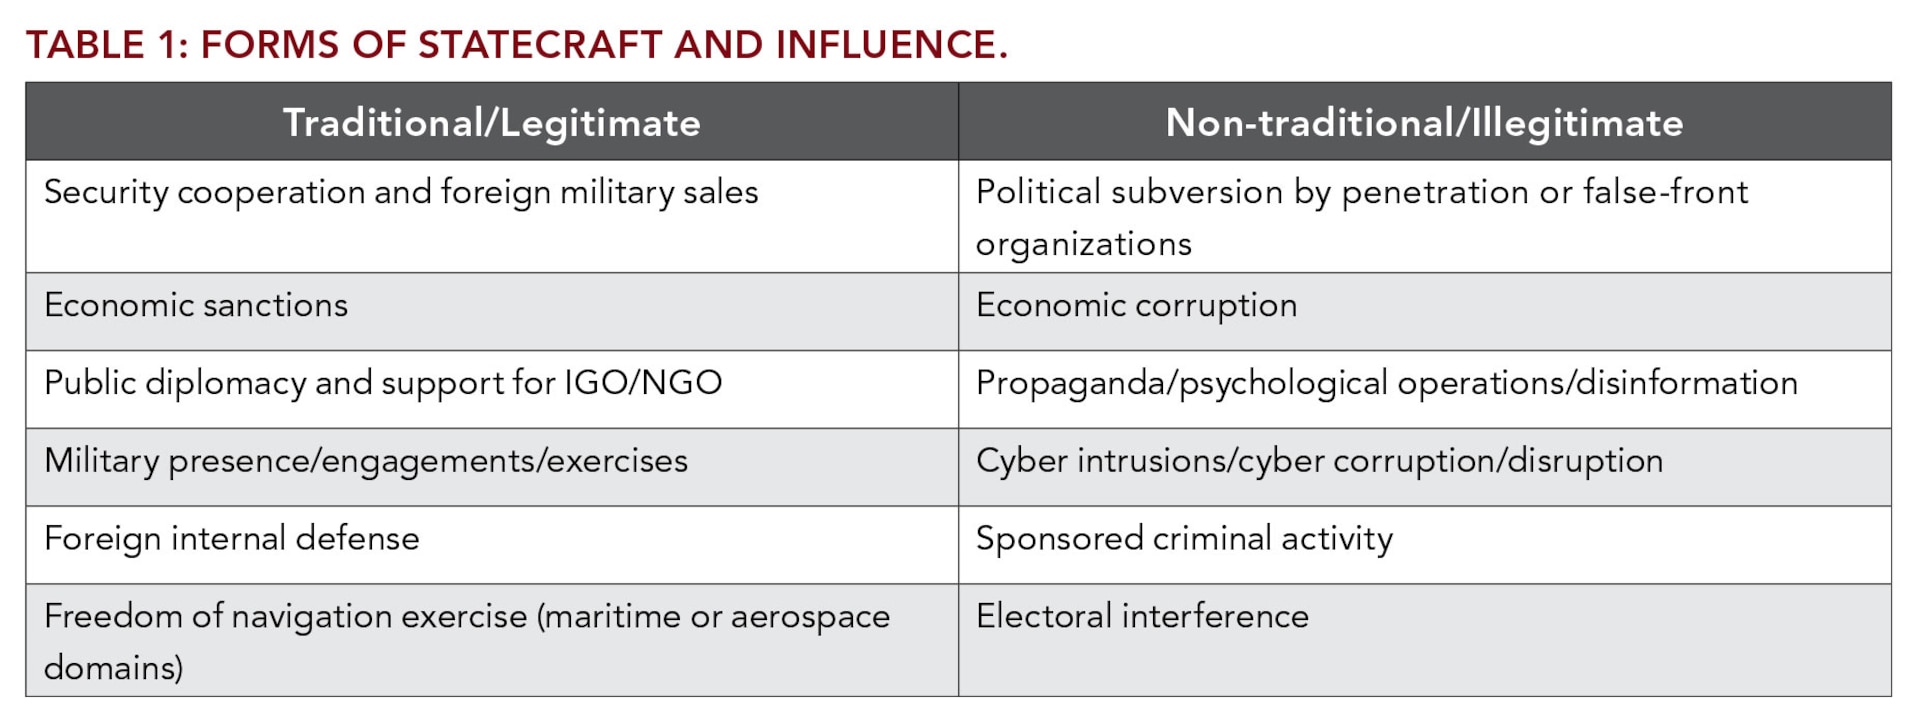 Table 1: Forms of Statecraft and Influence